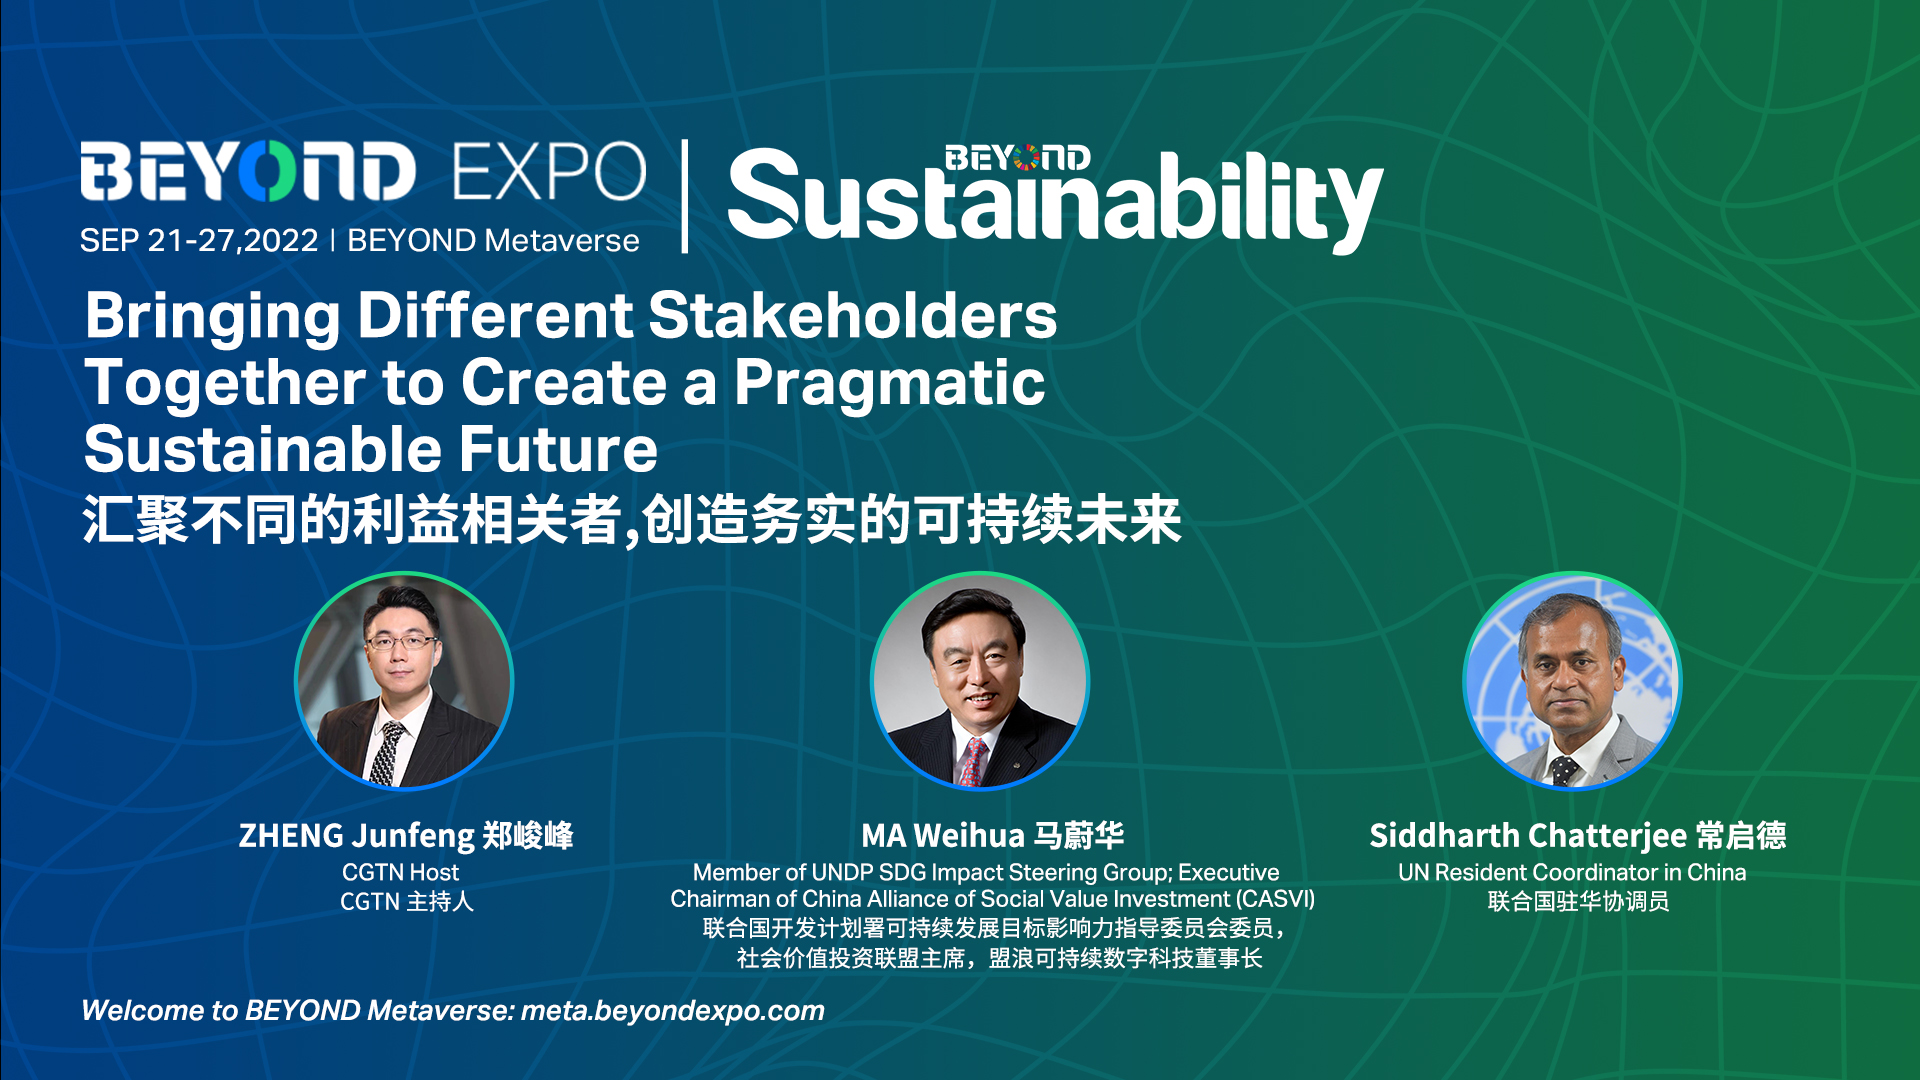 Live: BEYOND Expo – Bringing different stakeholders together to create a pragmatic sustainable future